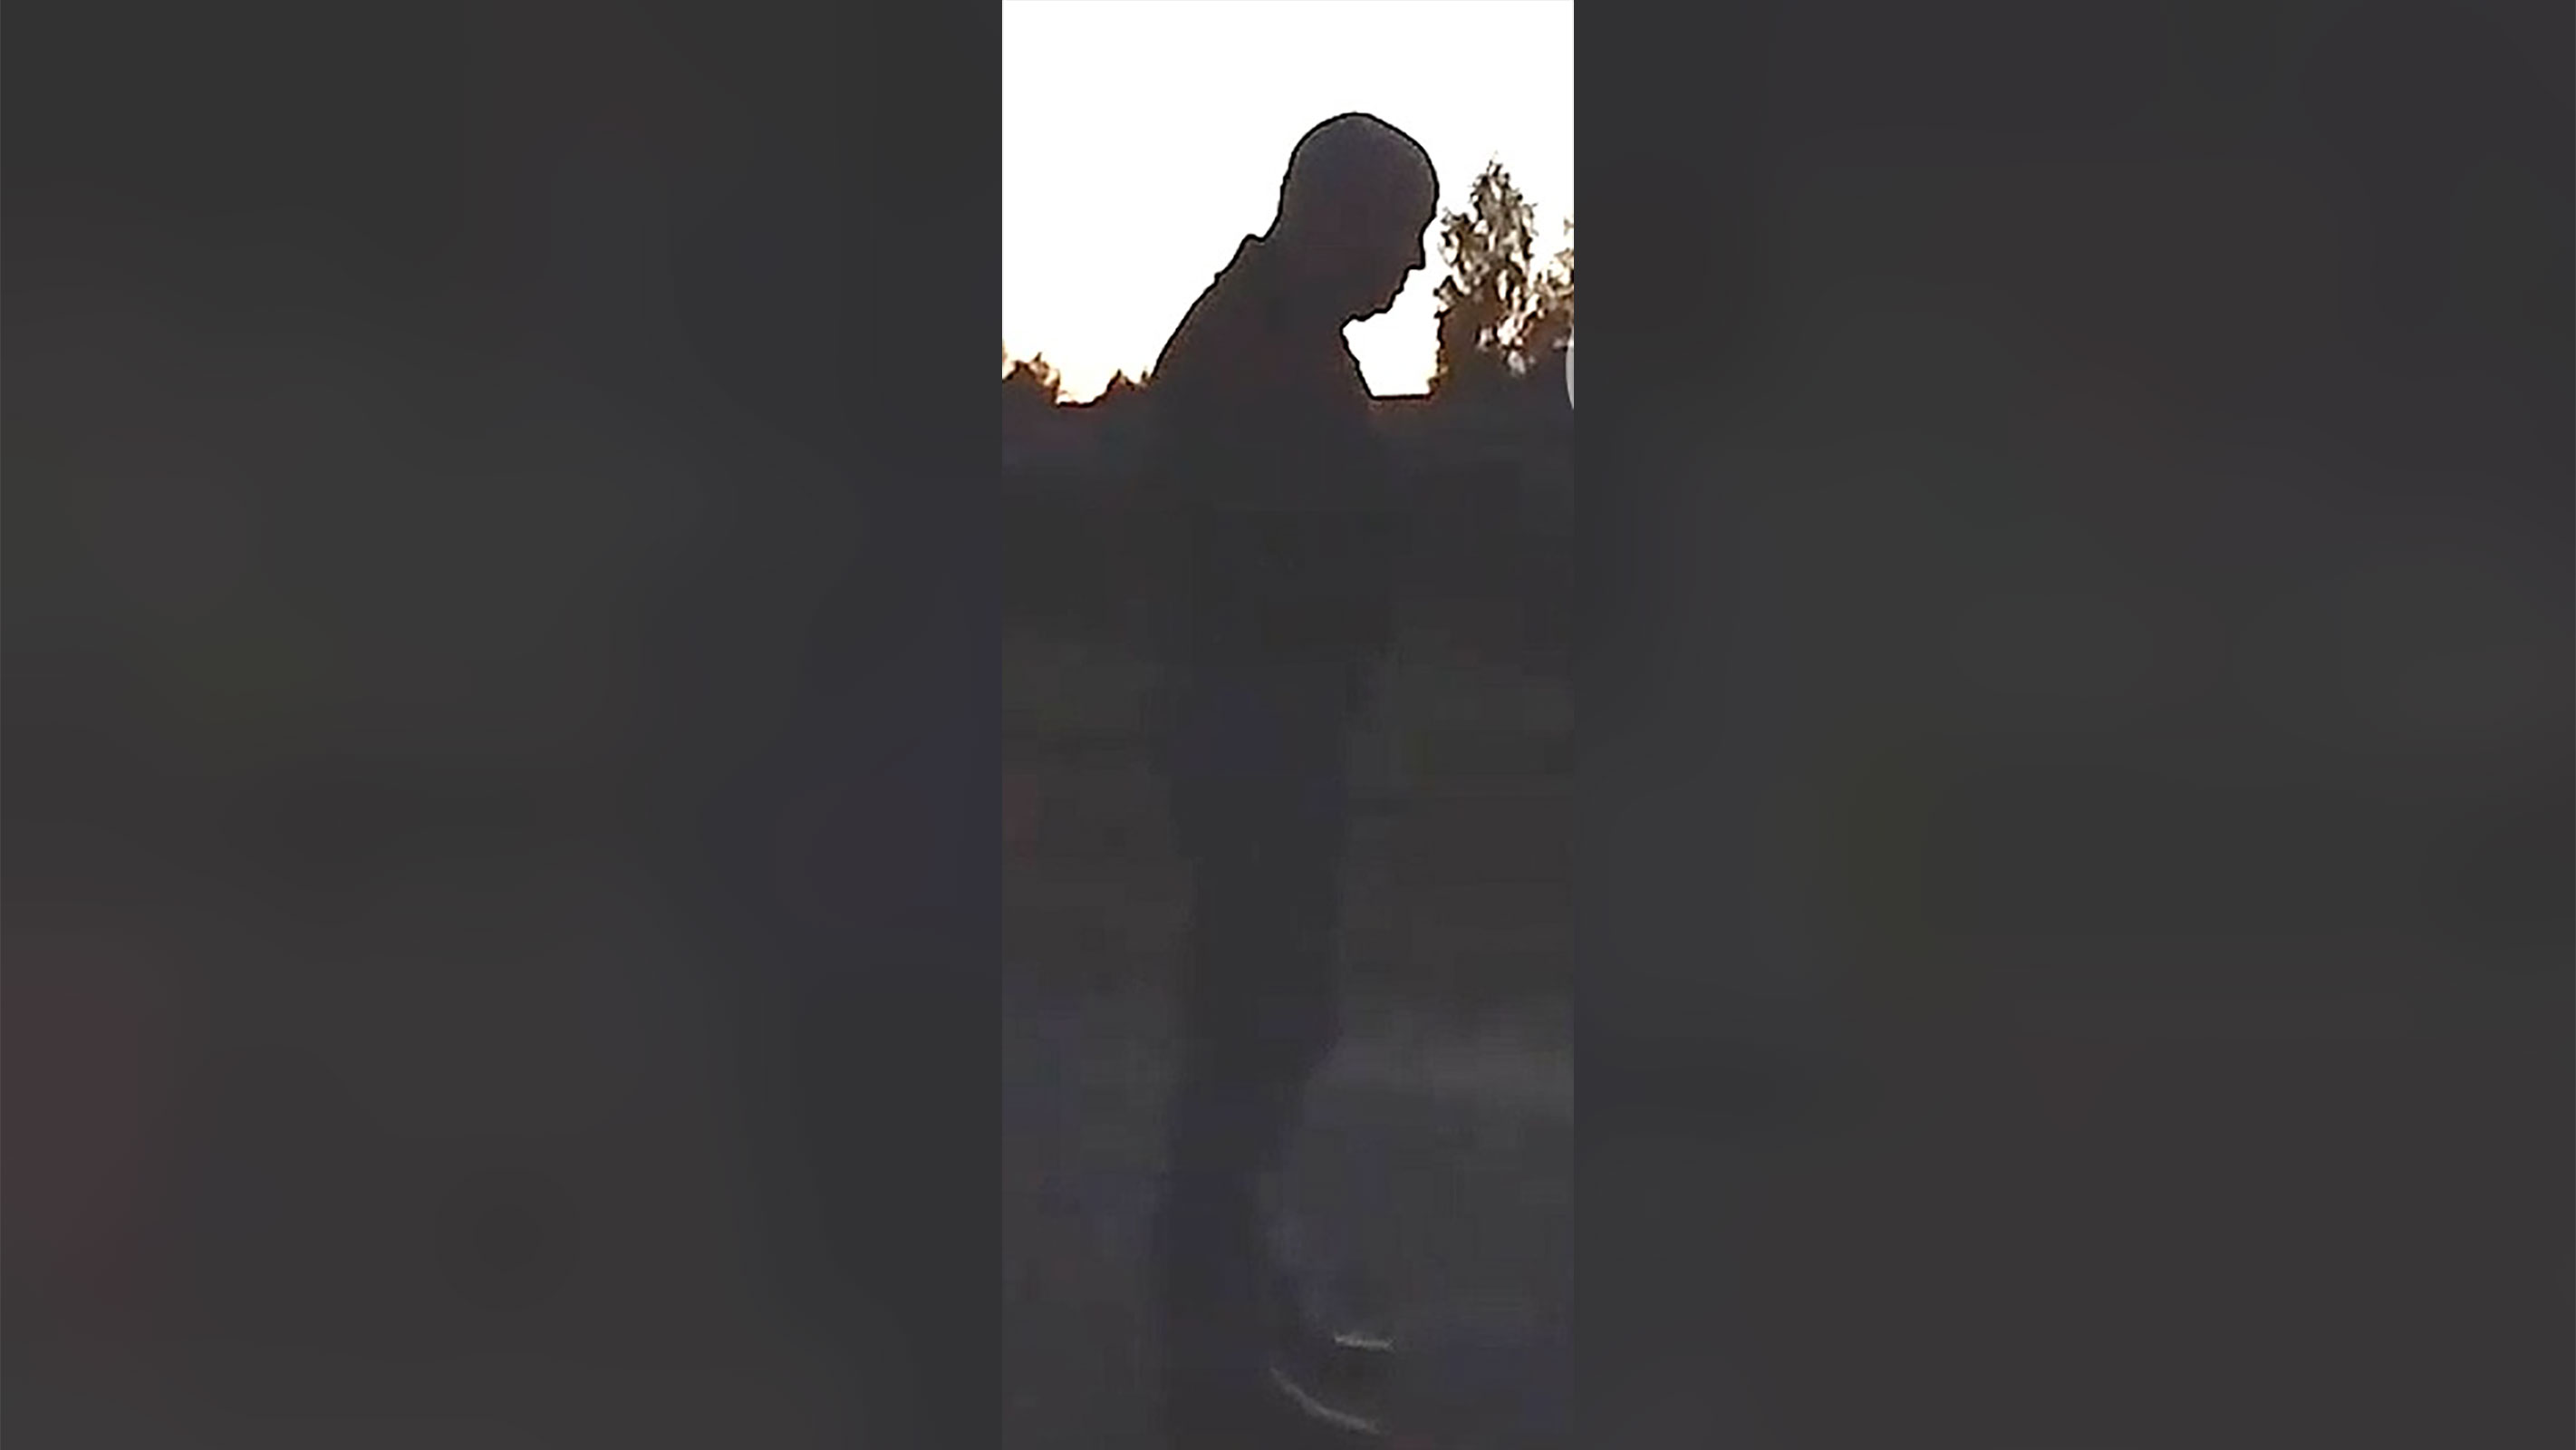 The following still is a screengrab from a video showing the silhouette of a man who appears to be Prigozhin. The still has been brightened to make the image clearer.